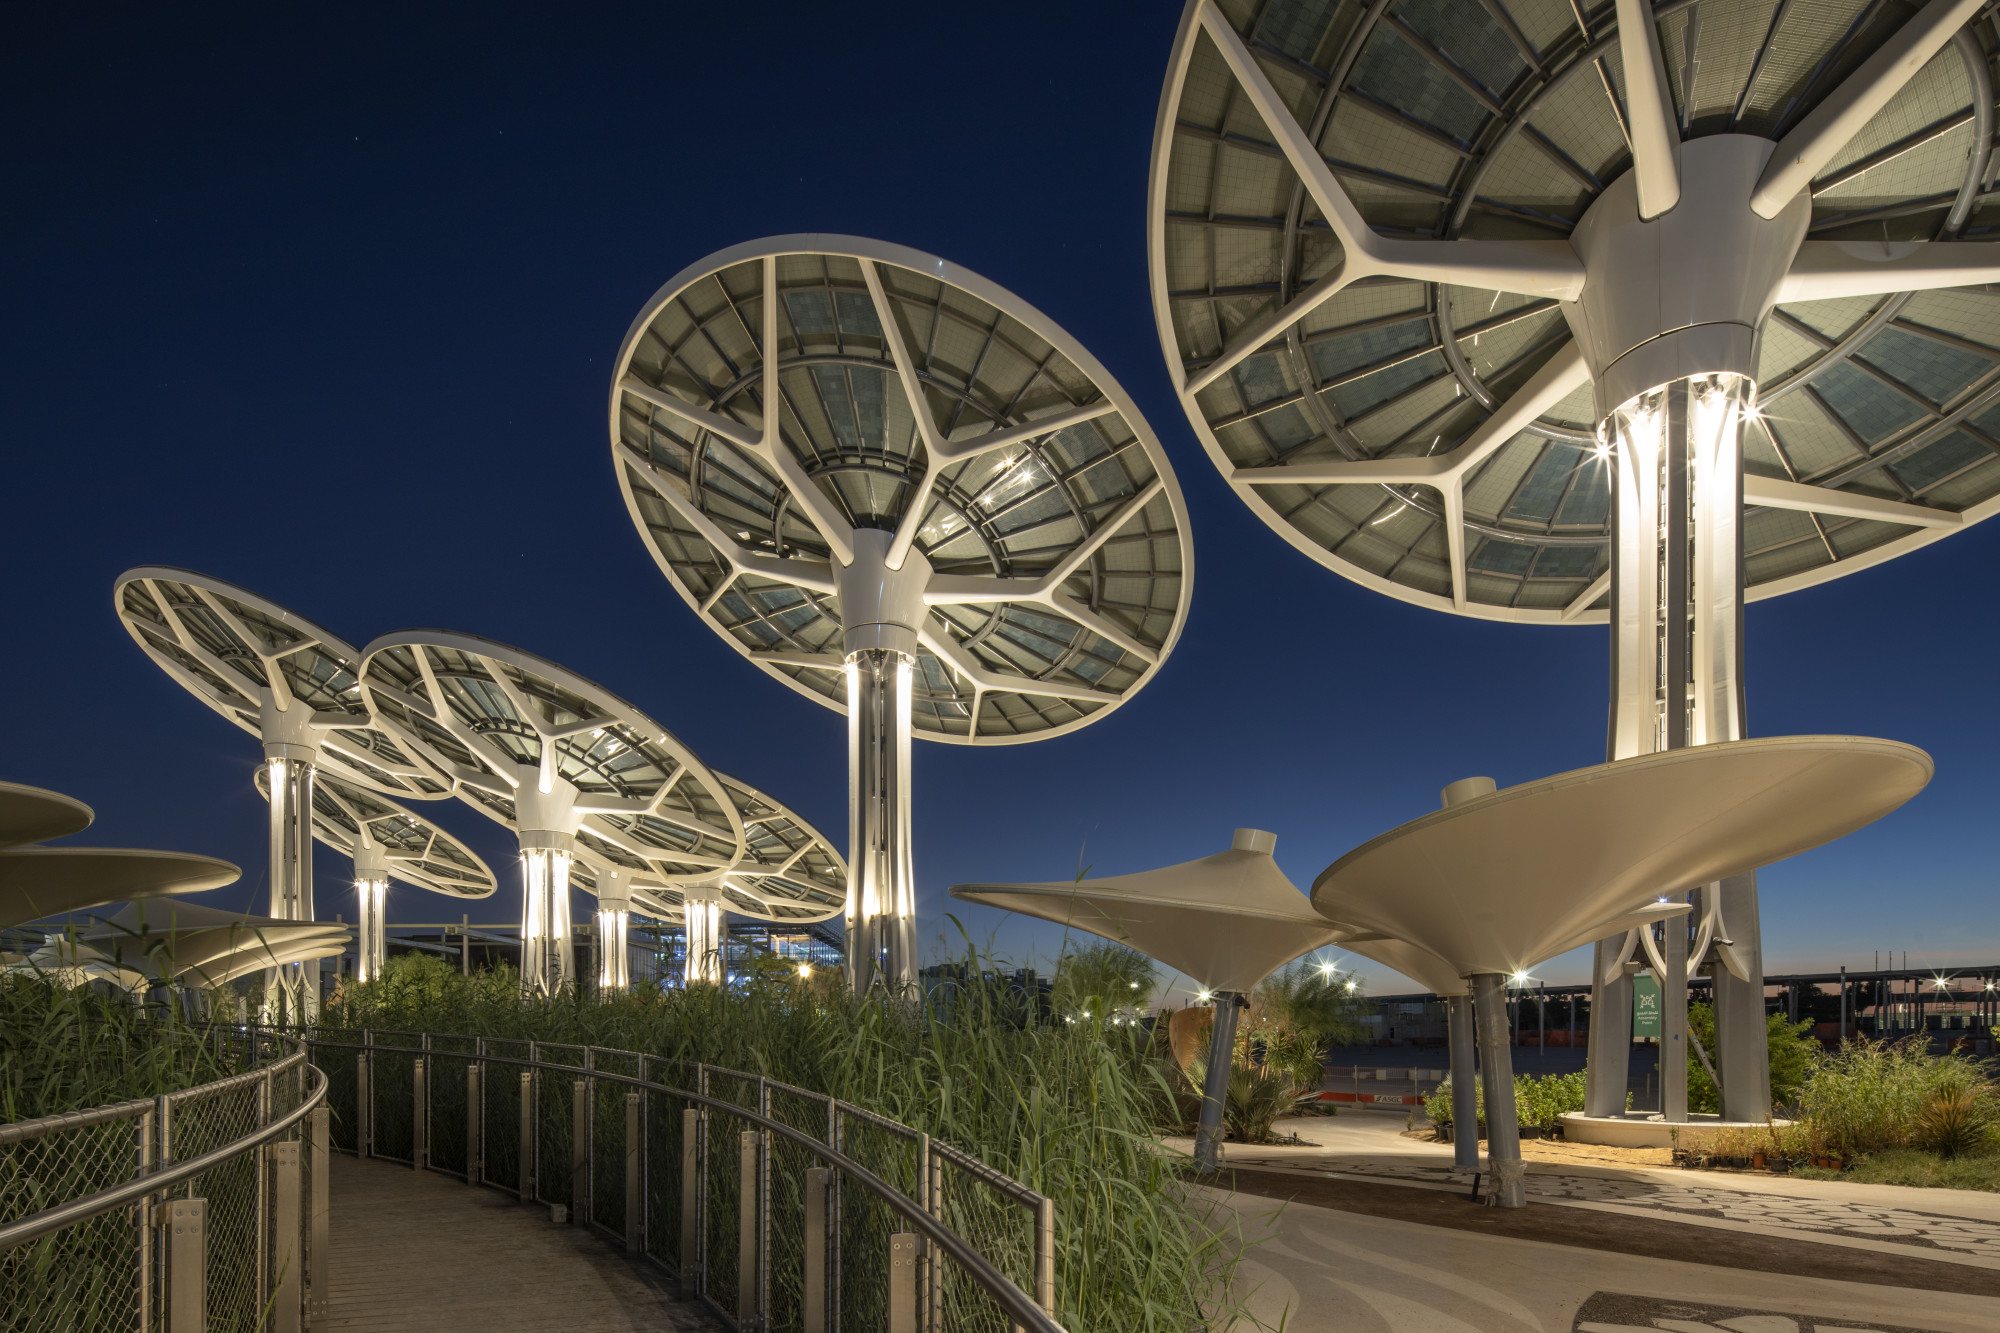 Designing a sustainable legacy for Expo 2020 Dubai - Arup